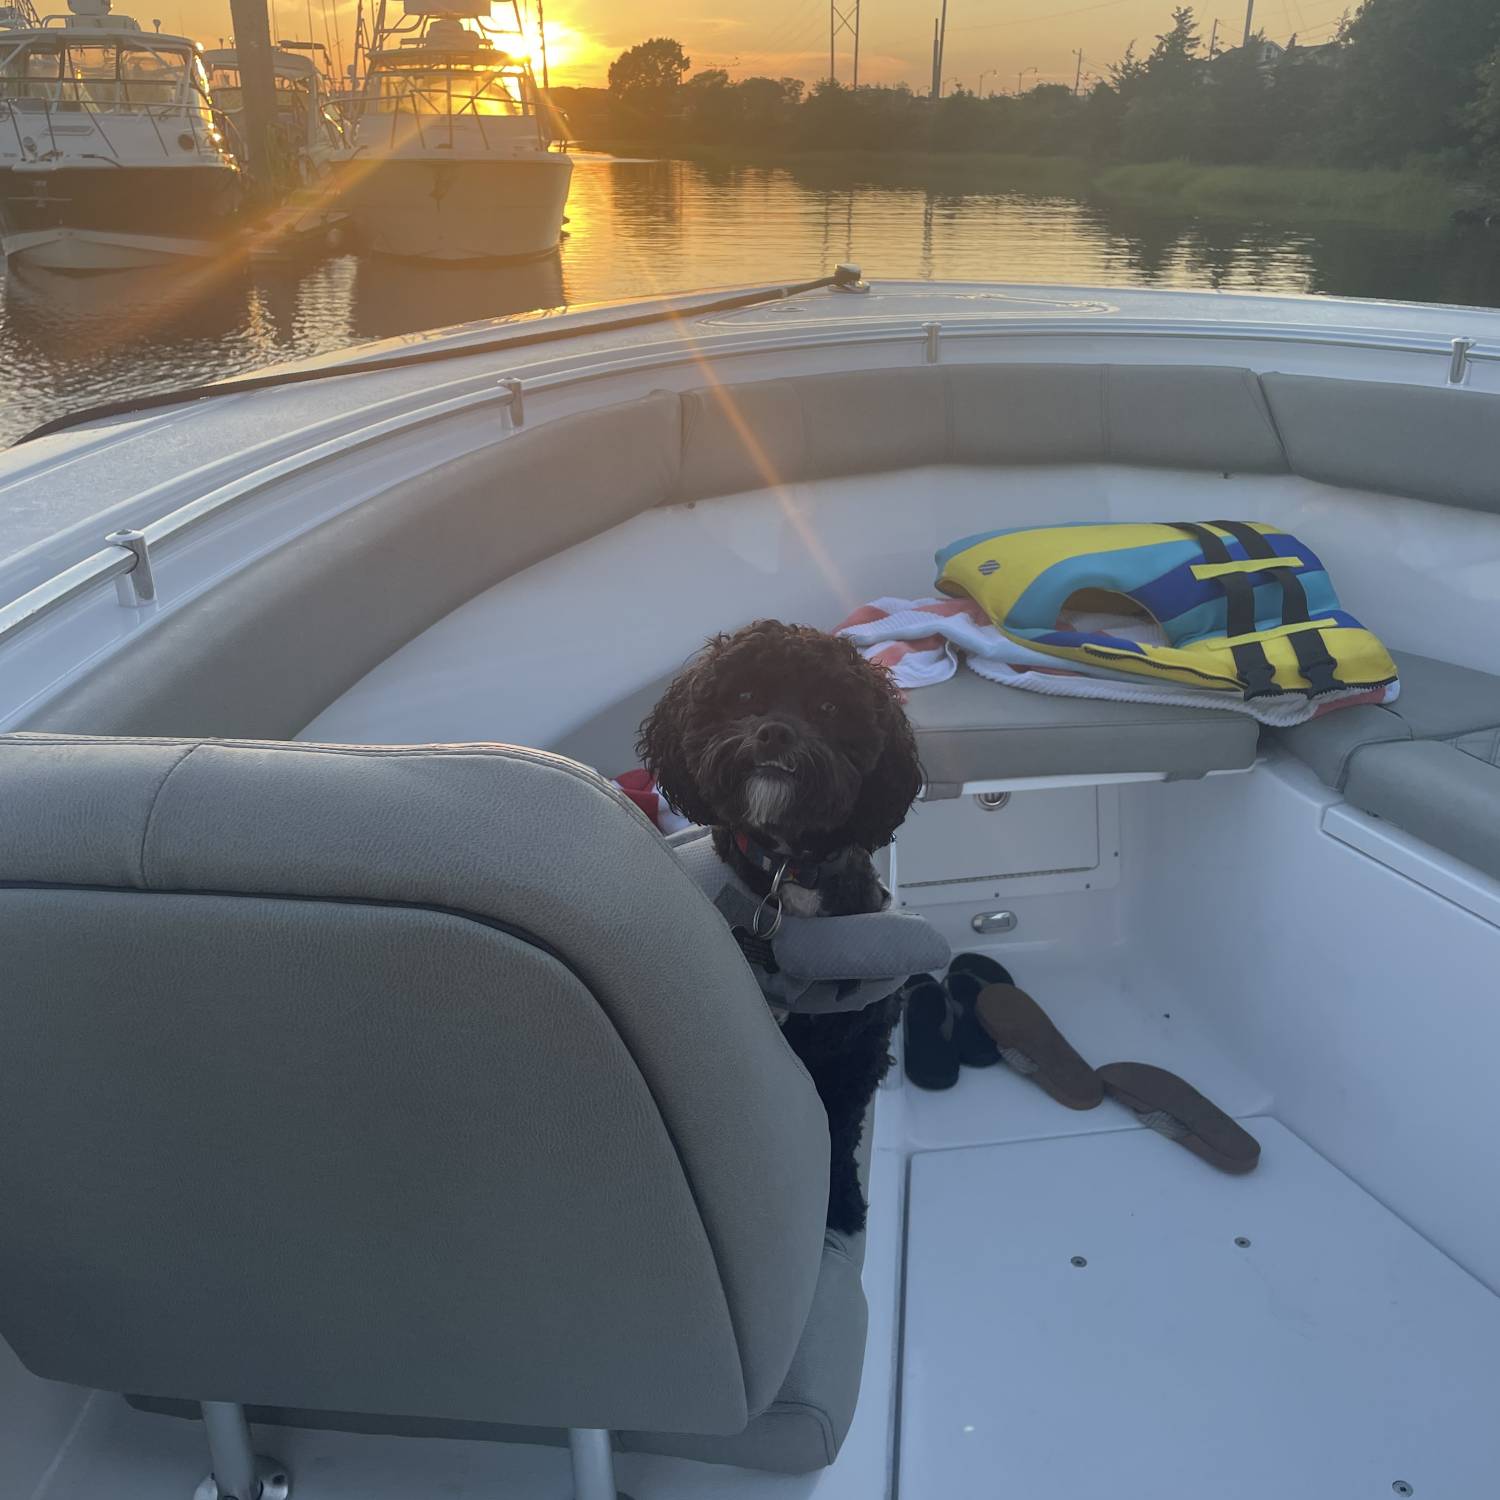 Our buddy Bill Belichick loves sunsets on the bow